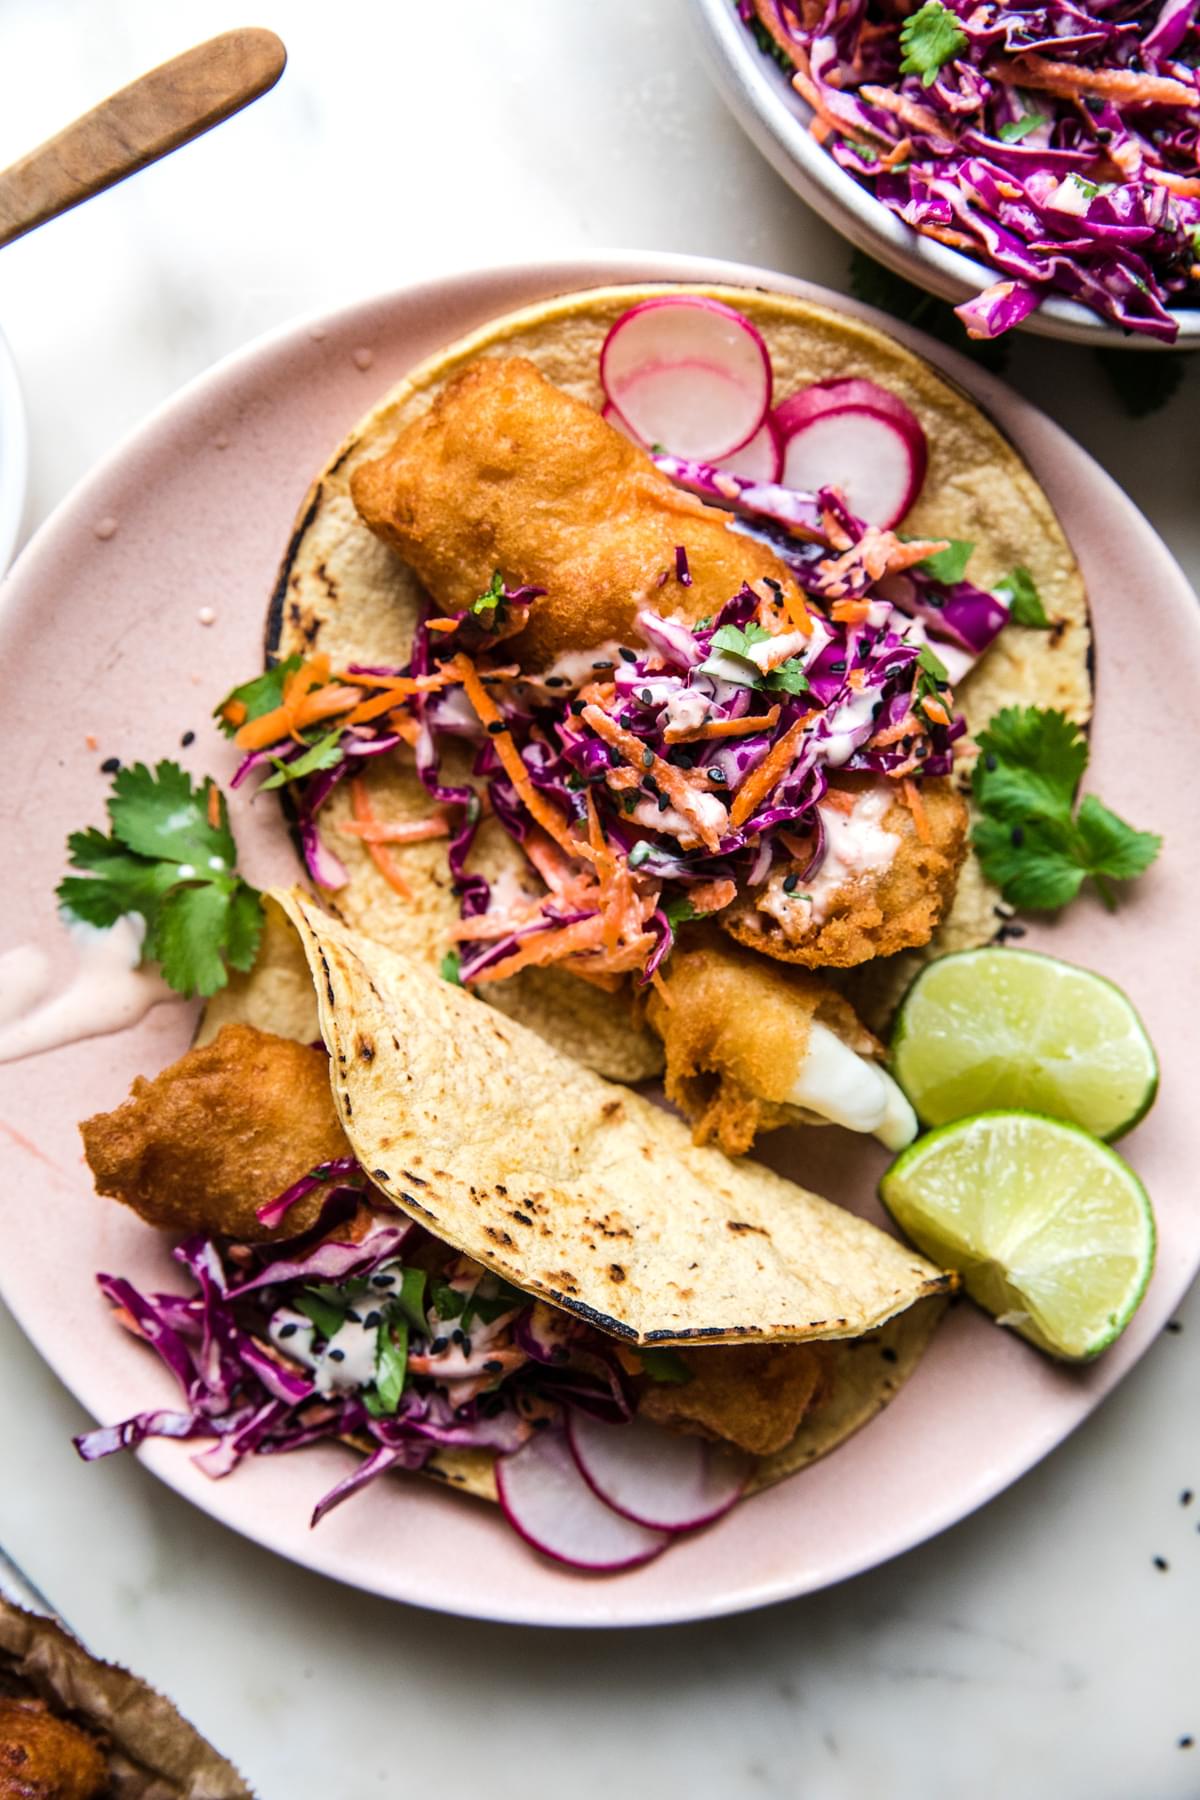 beer battered fish tacos on a plate with radishes and limes